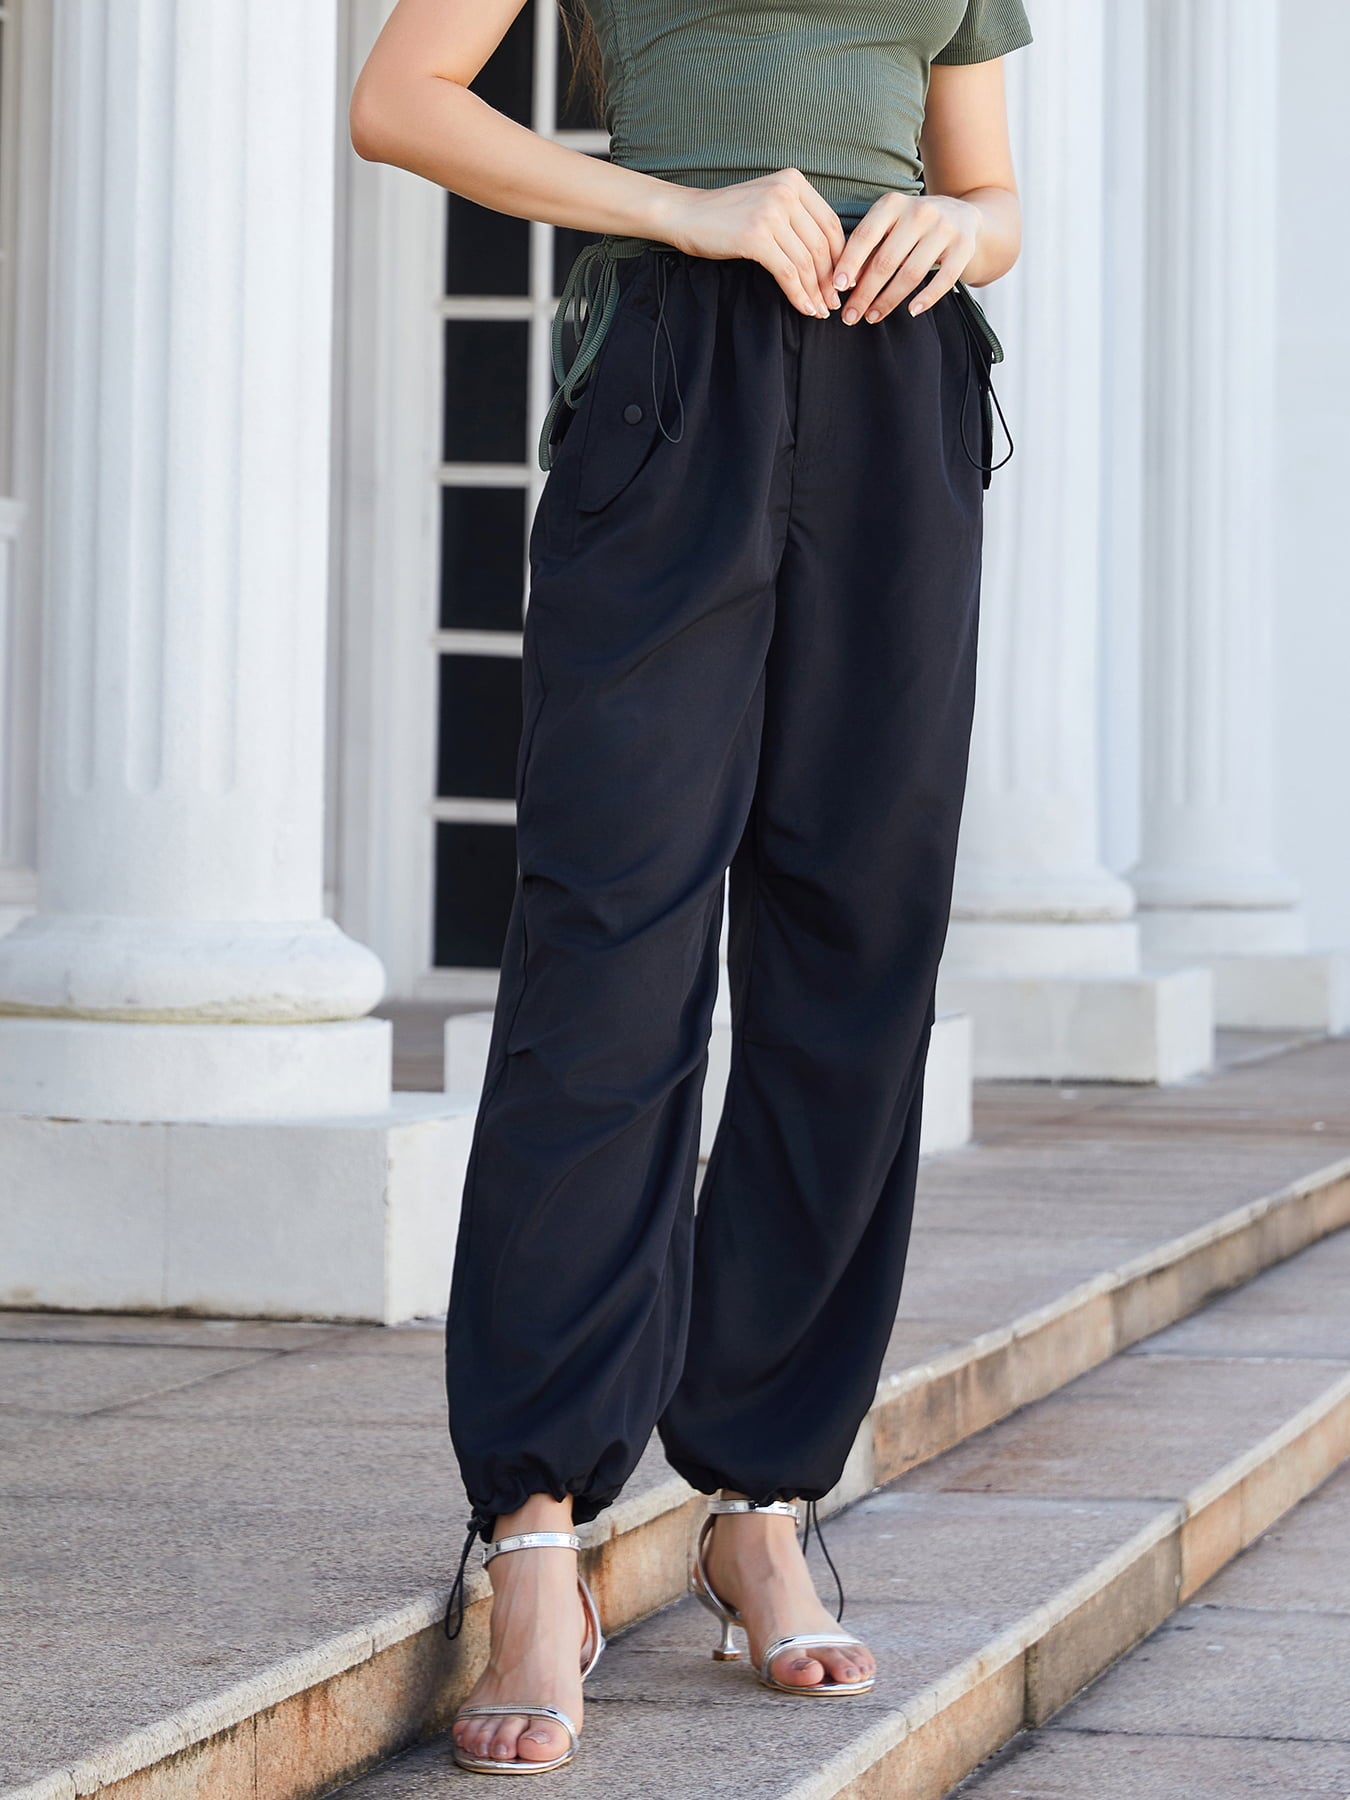 Women’s Drawstring Pants with Pockets